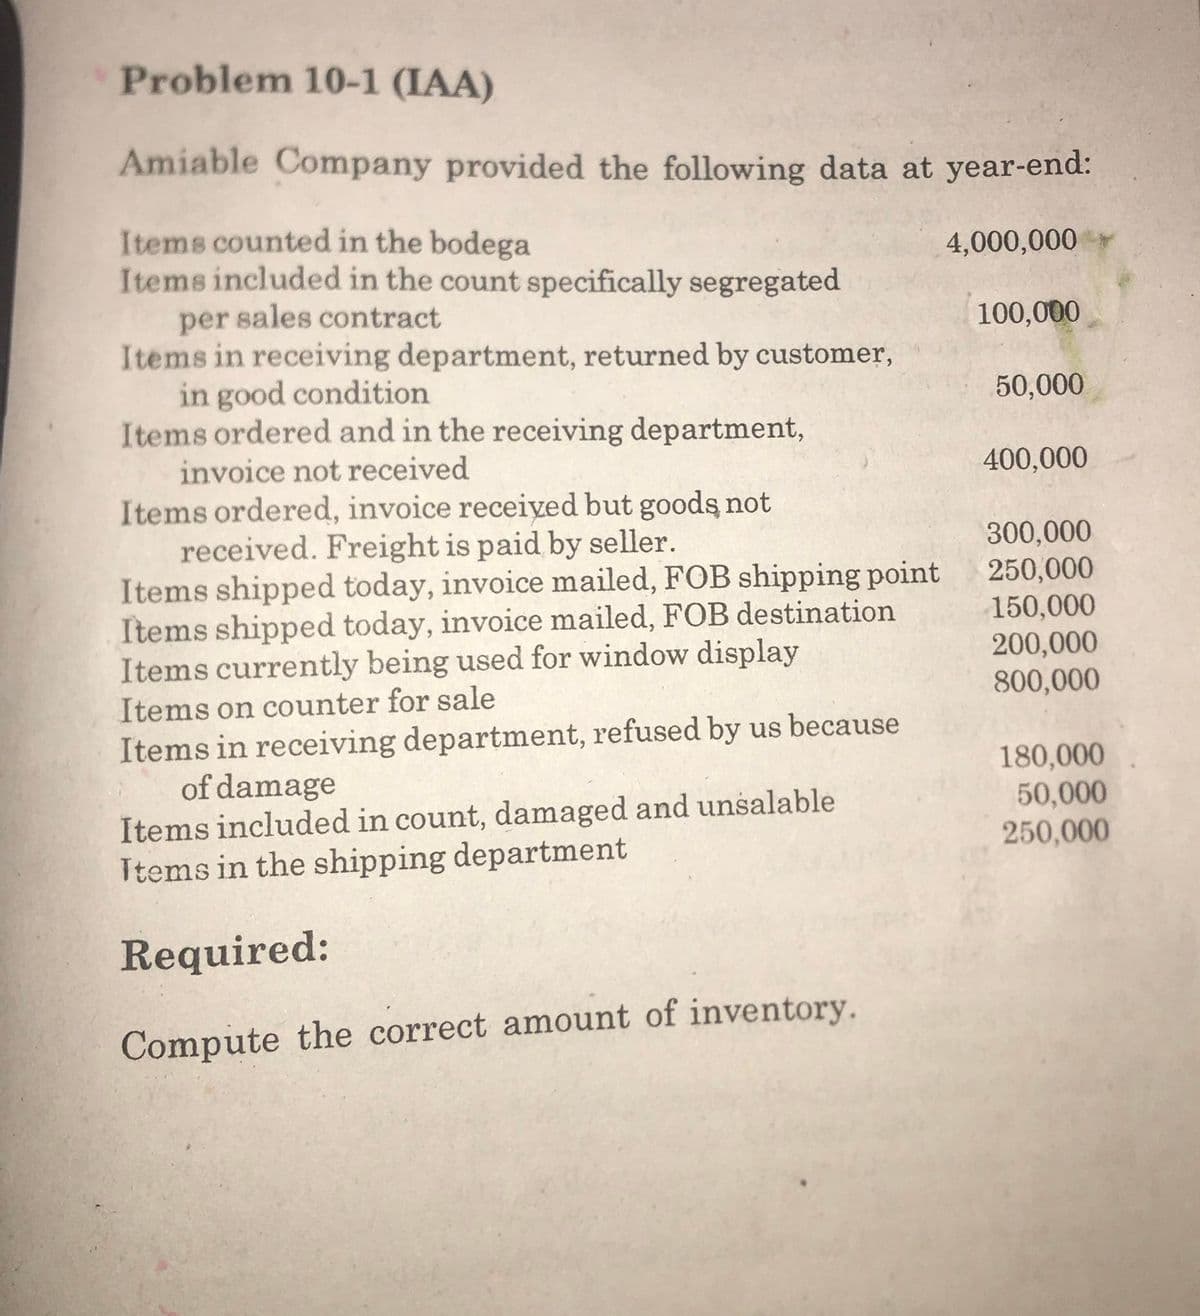 Problem 10-1 (IAA)
Amiable Company provided the following data at year-end:
Items counted in the bodega
Items included in the count specifically segregated
per sales contract
Items in receiving department, returned by customer,
in good condition
Items ordered and in the receiving department,
4,000,000
100,000
50,000
invoice not received
Items ordered, invoice received but goods not
received. Freight is paid by seller.
Items shipped today, invoice mailed, FOB shipping point
Items shipped today, invoice mailed, FOB destination
Items currently being used for window display
Items on counter for sale
400,000
300,000
250,000
150,000
200,000
800,000
Items in receiving department, refused by us because
of damage
180,000
Items included in count, damaged and unsalable
Items in the shipping department
50,000
250,000
Required:
Compute the correct amount of inventory.
